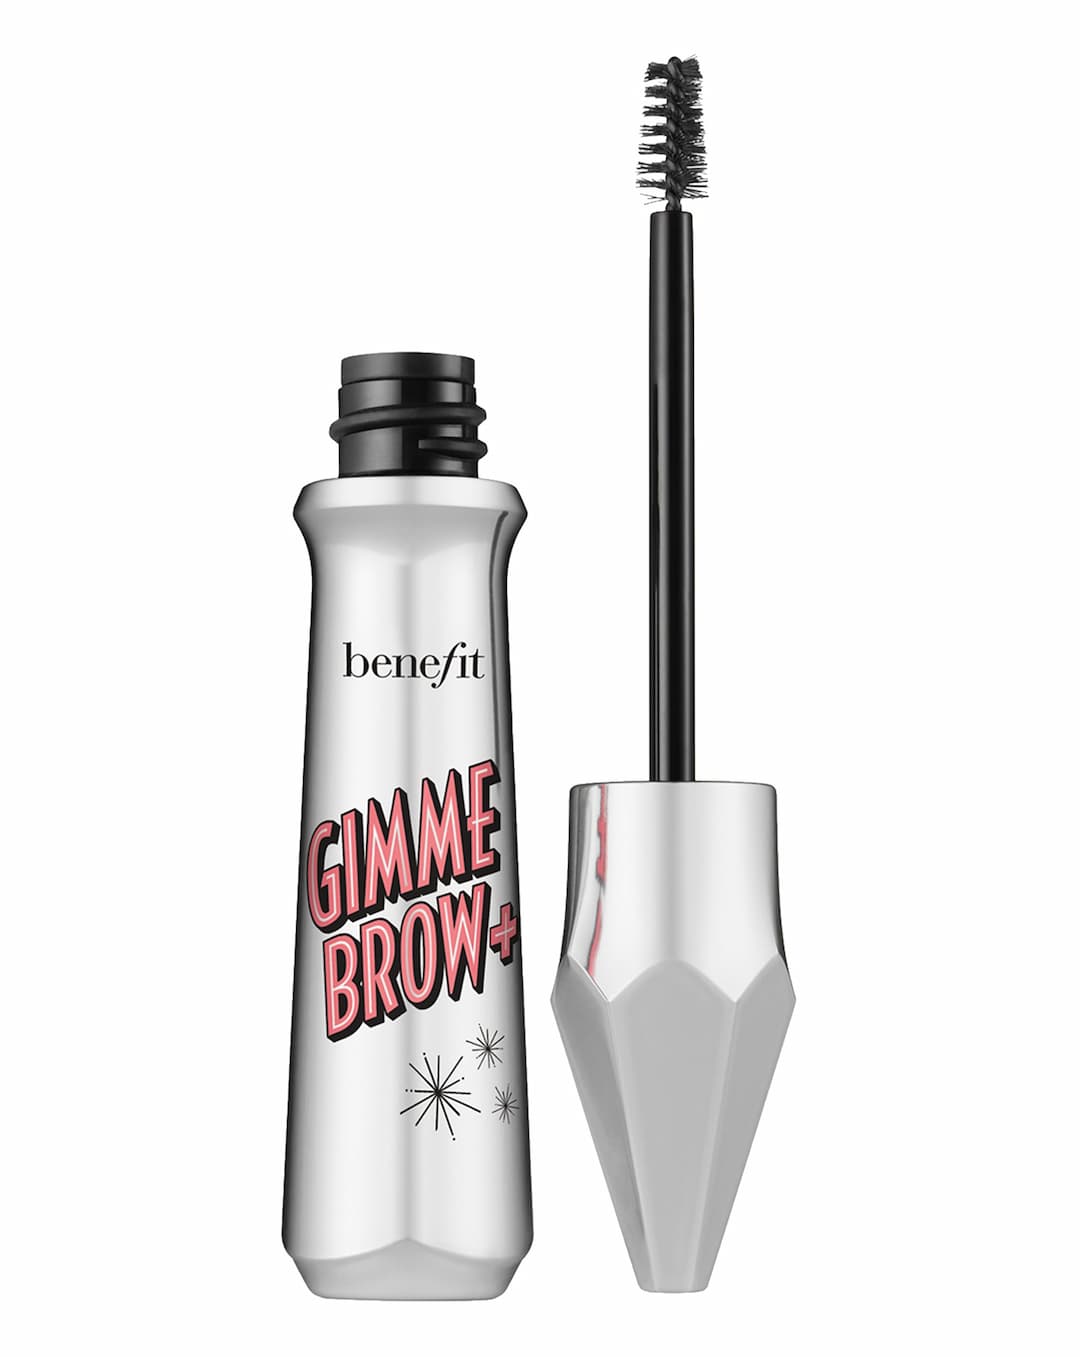 Benefit - Gimme Brow+ Shade 1